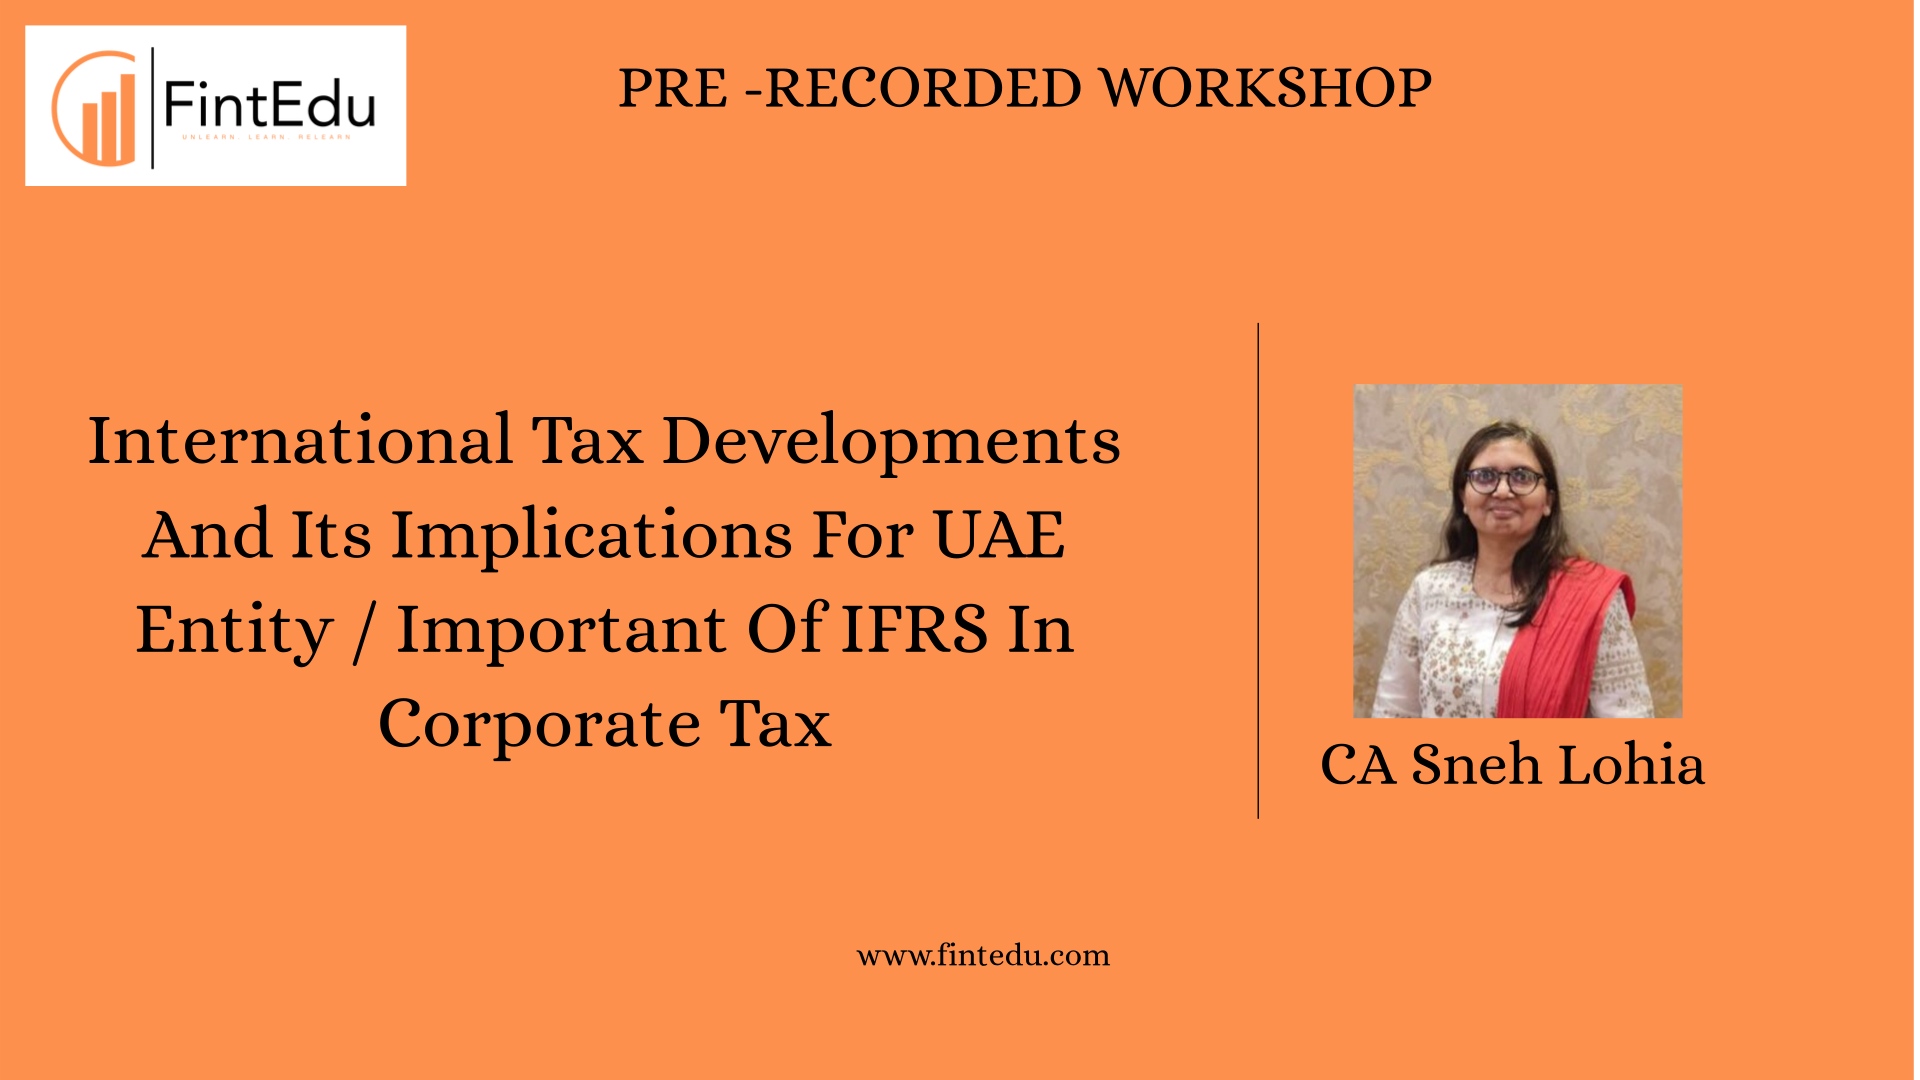 International Tax Developments And Its Implications For UAE Entity / Important Of IFRS In Corporate Tax